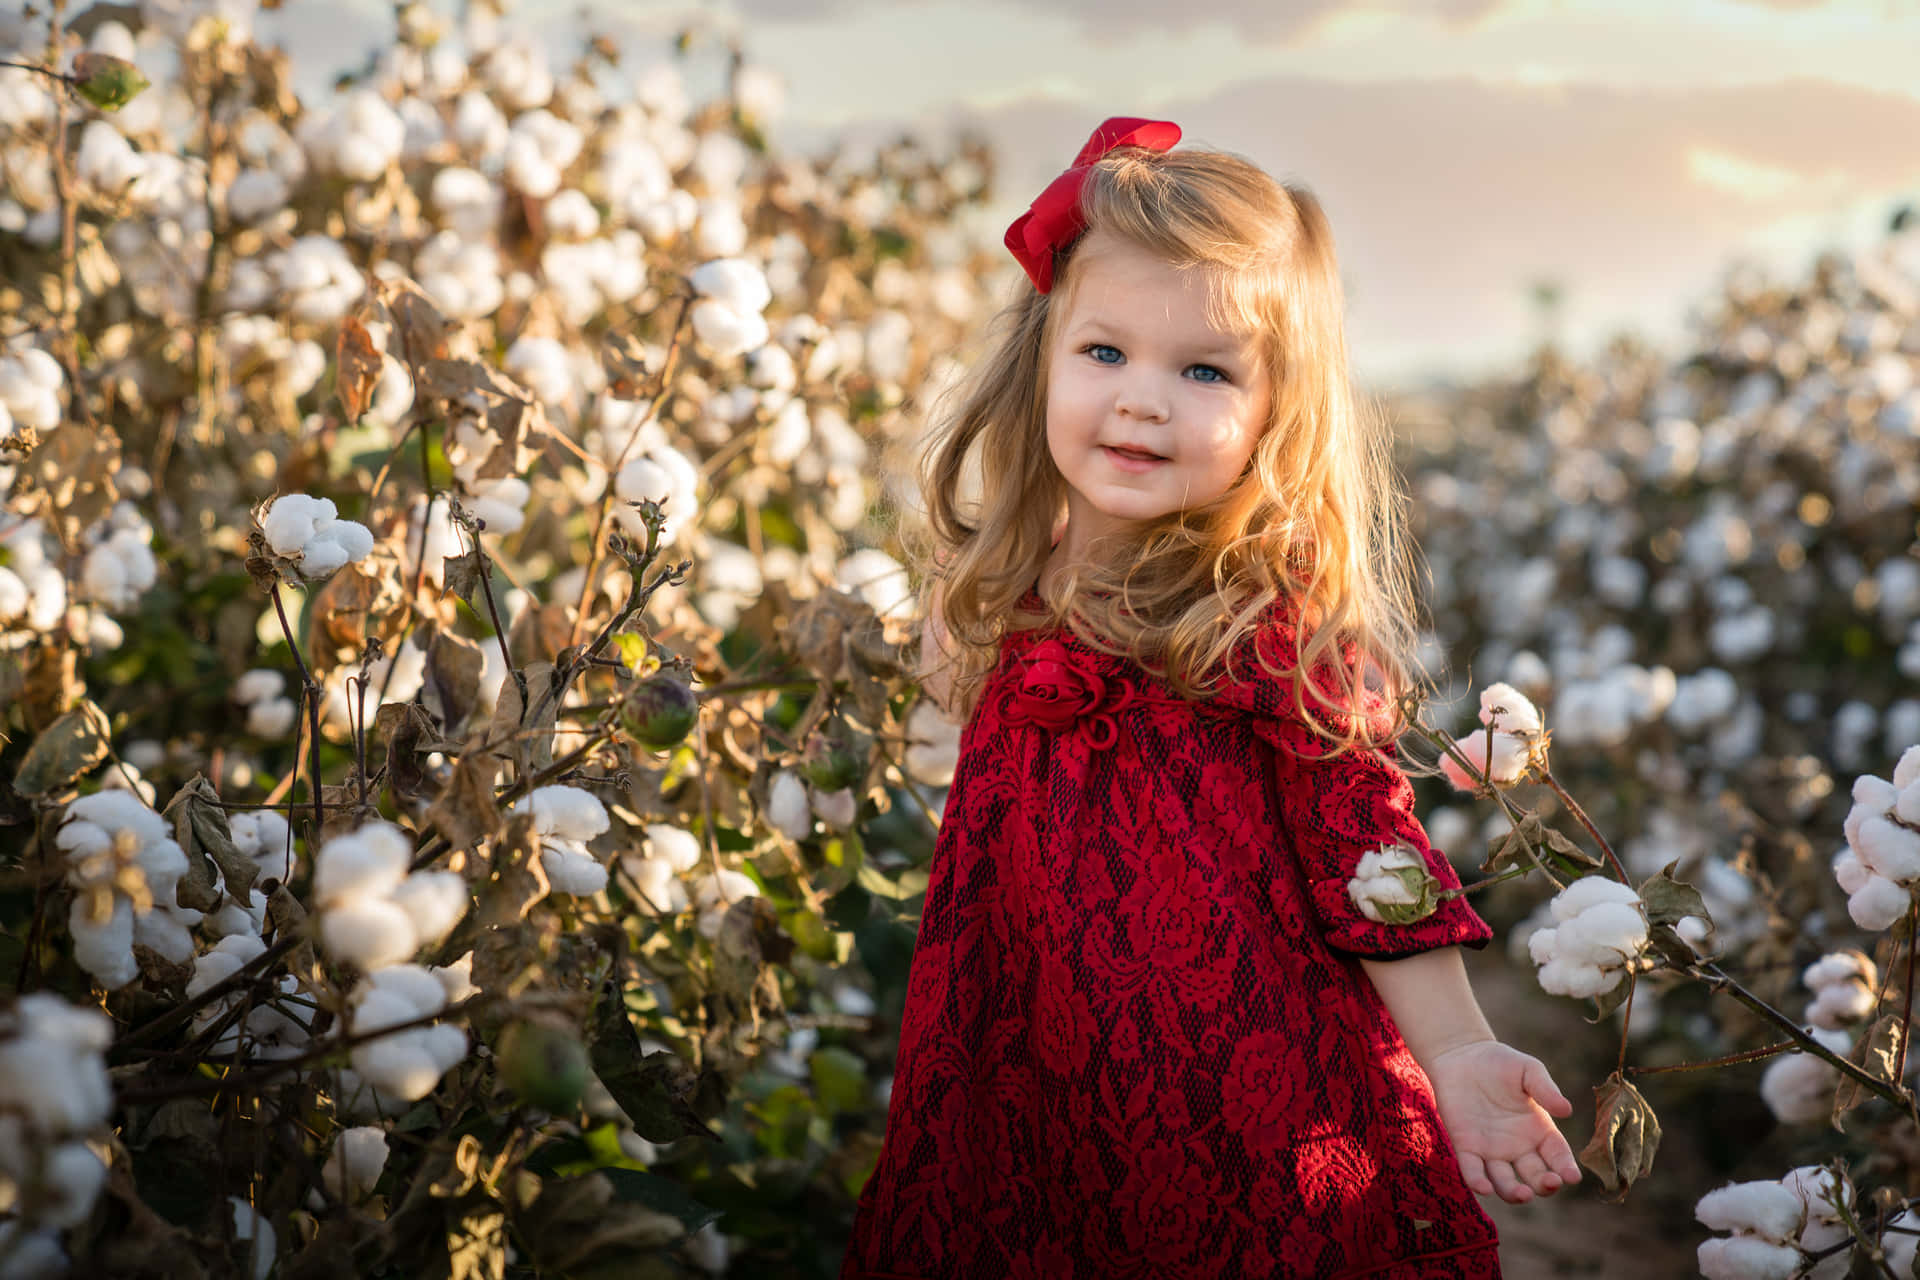 Enjoy the beauty of a tranquil cotton field.